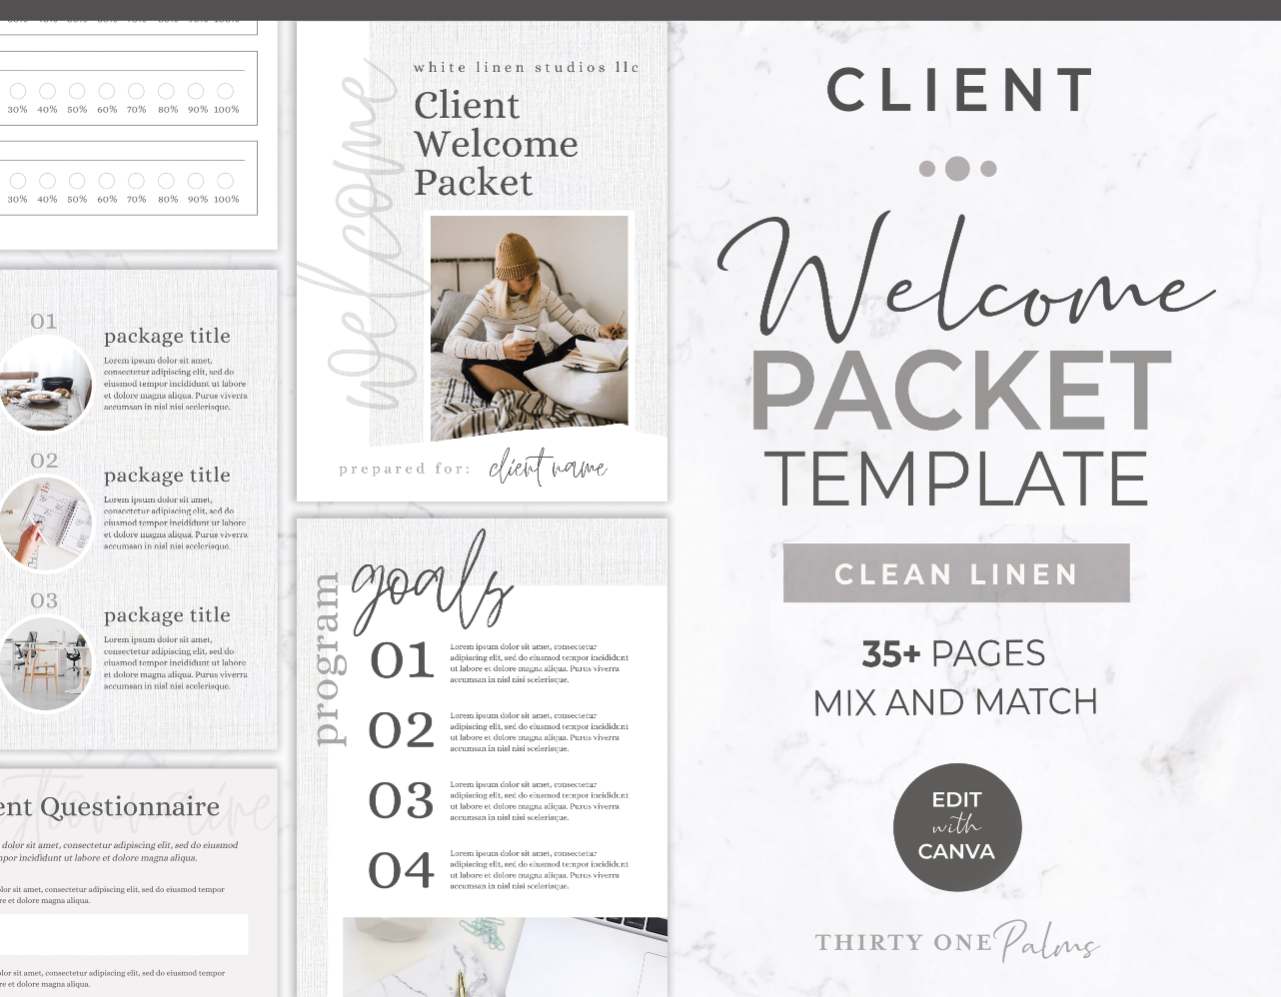 Client Welcome Packet Template for Canva – White Linen